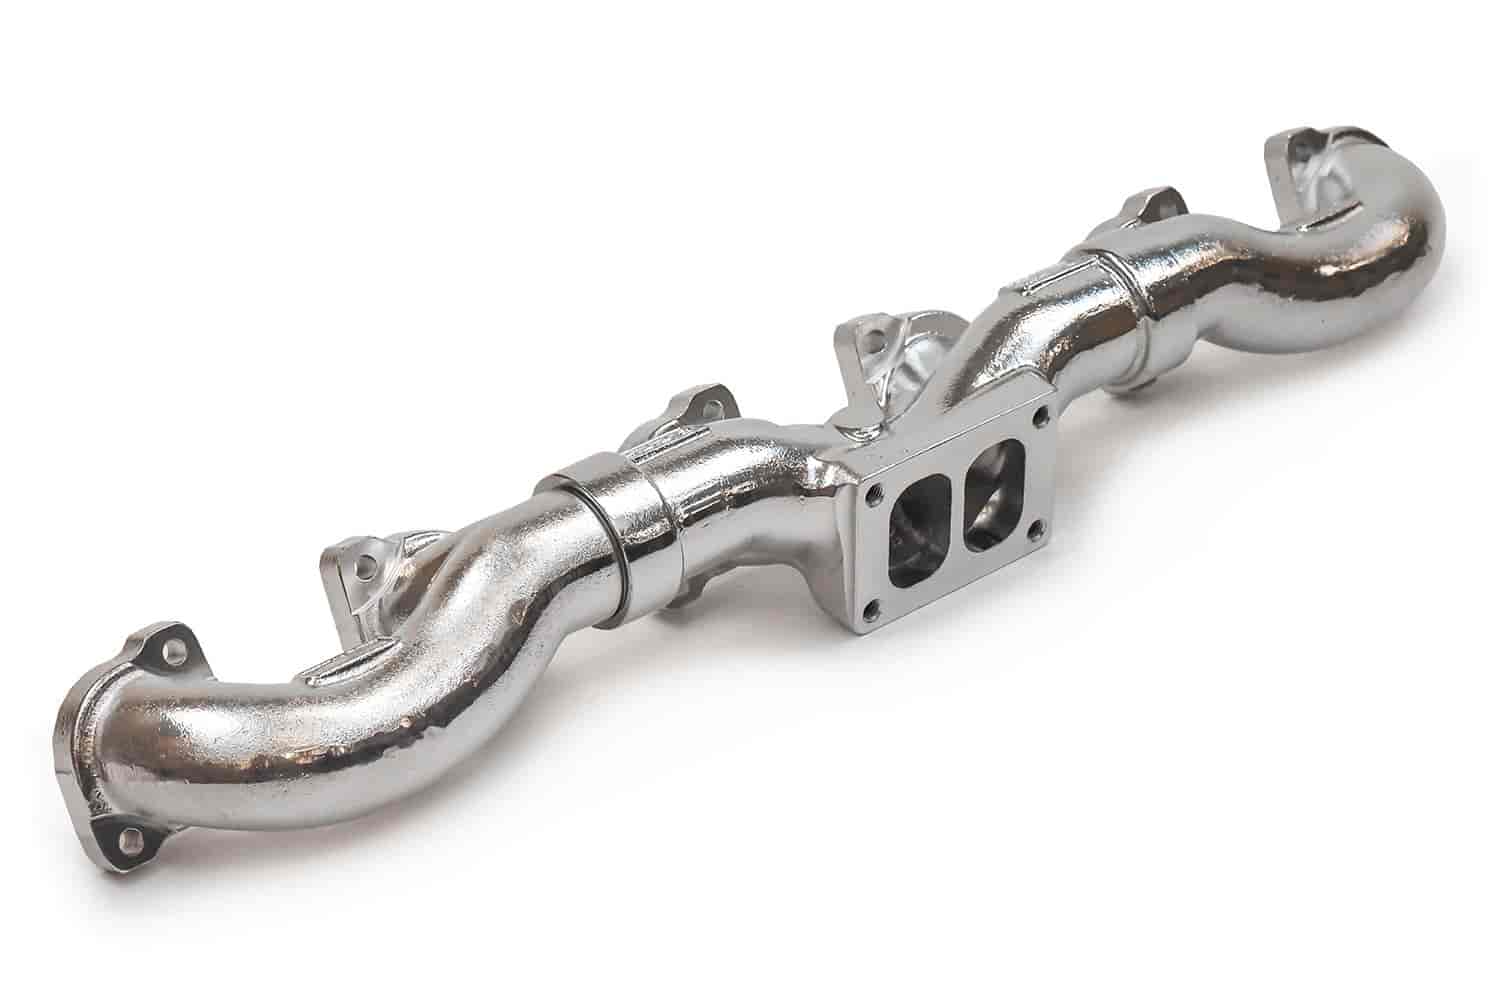 Big Boss Series 60 Exhaust Manifold for 2003-2006 Detroit Series 60 12.7L and 14L Engines - Polished Ceramic Coated